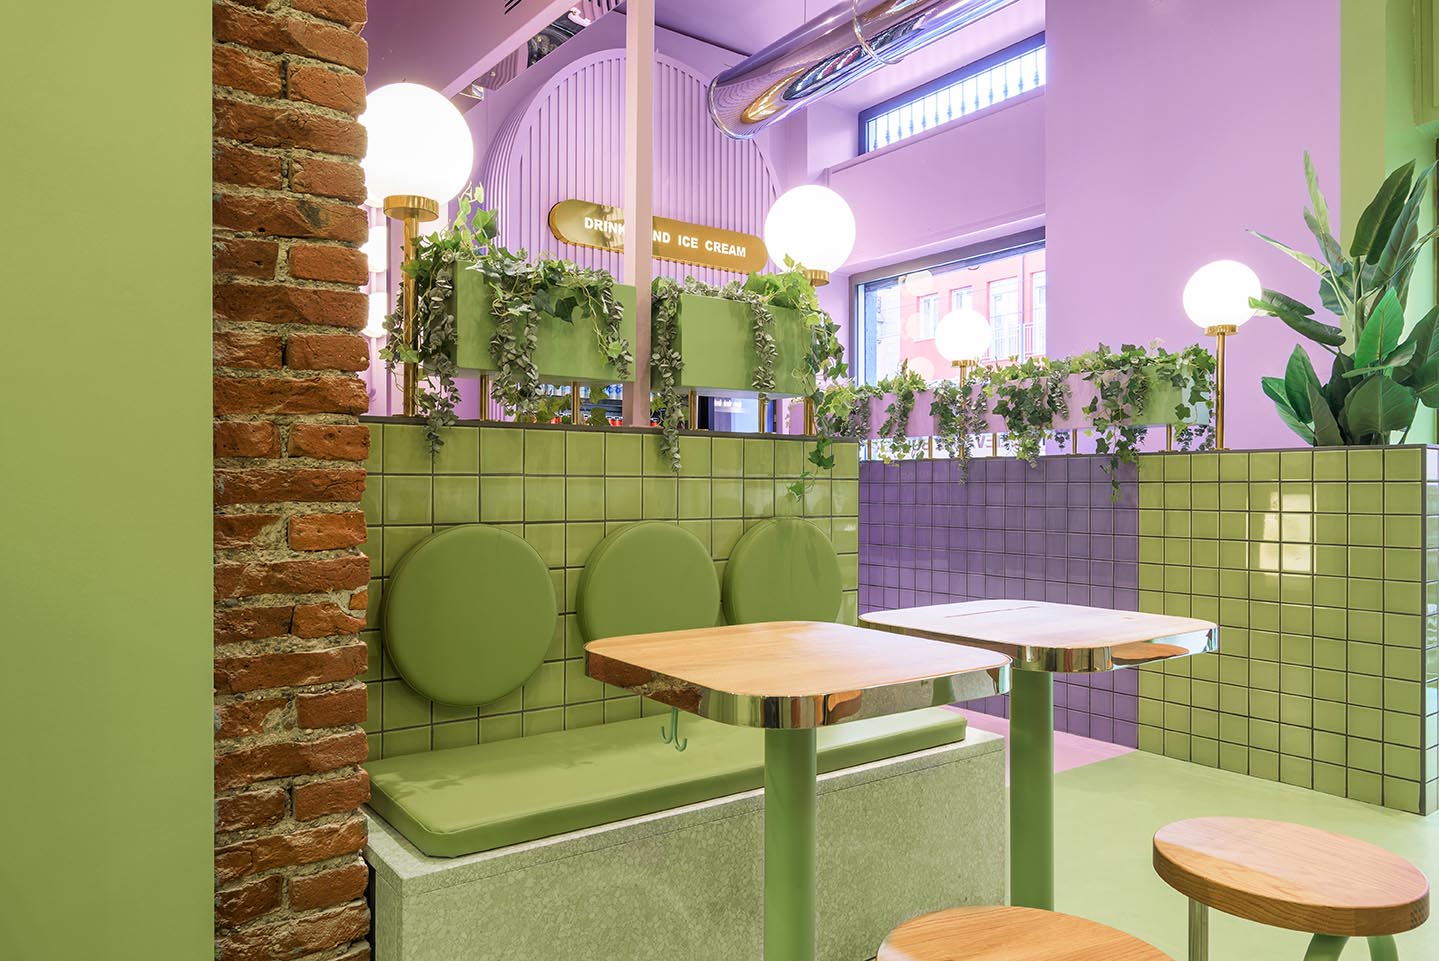 A new restaurant uses a colorful green and purple interior to draw people inside.